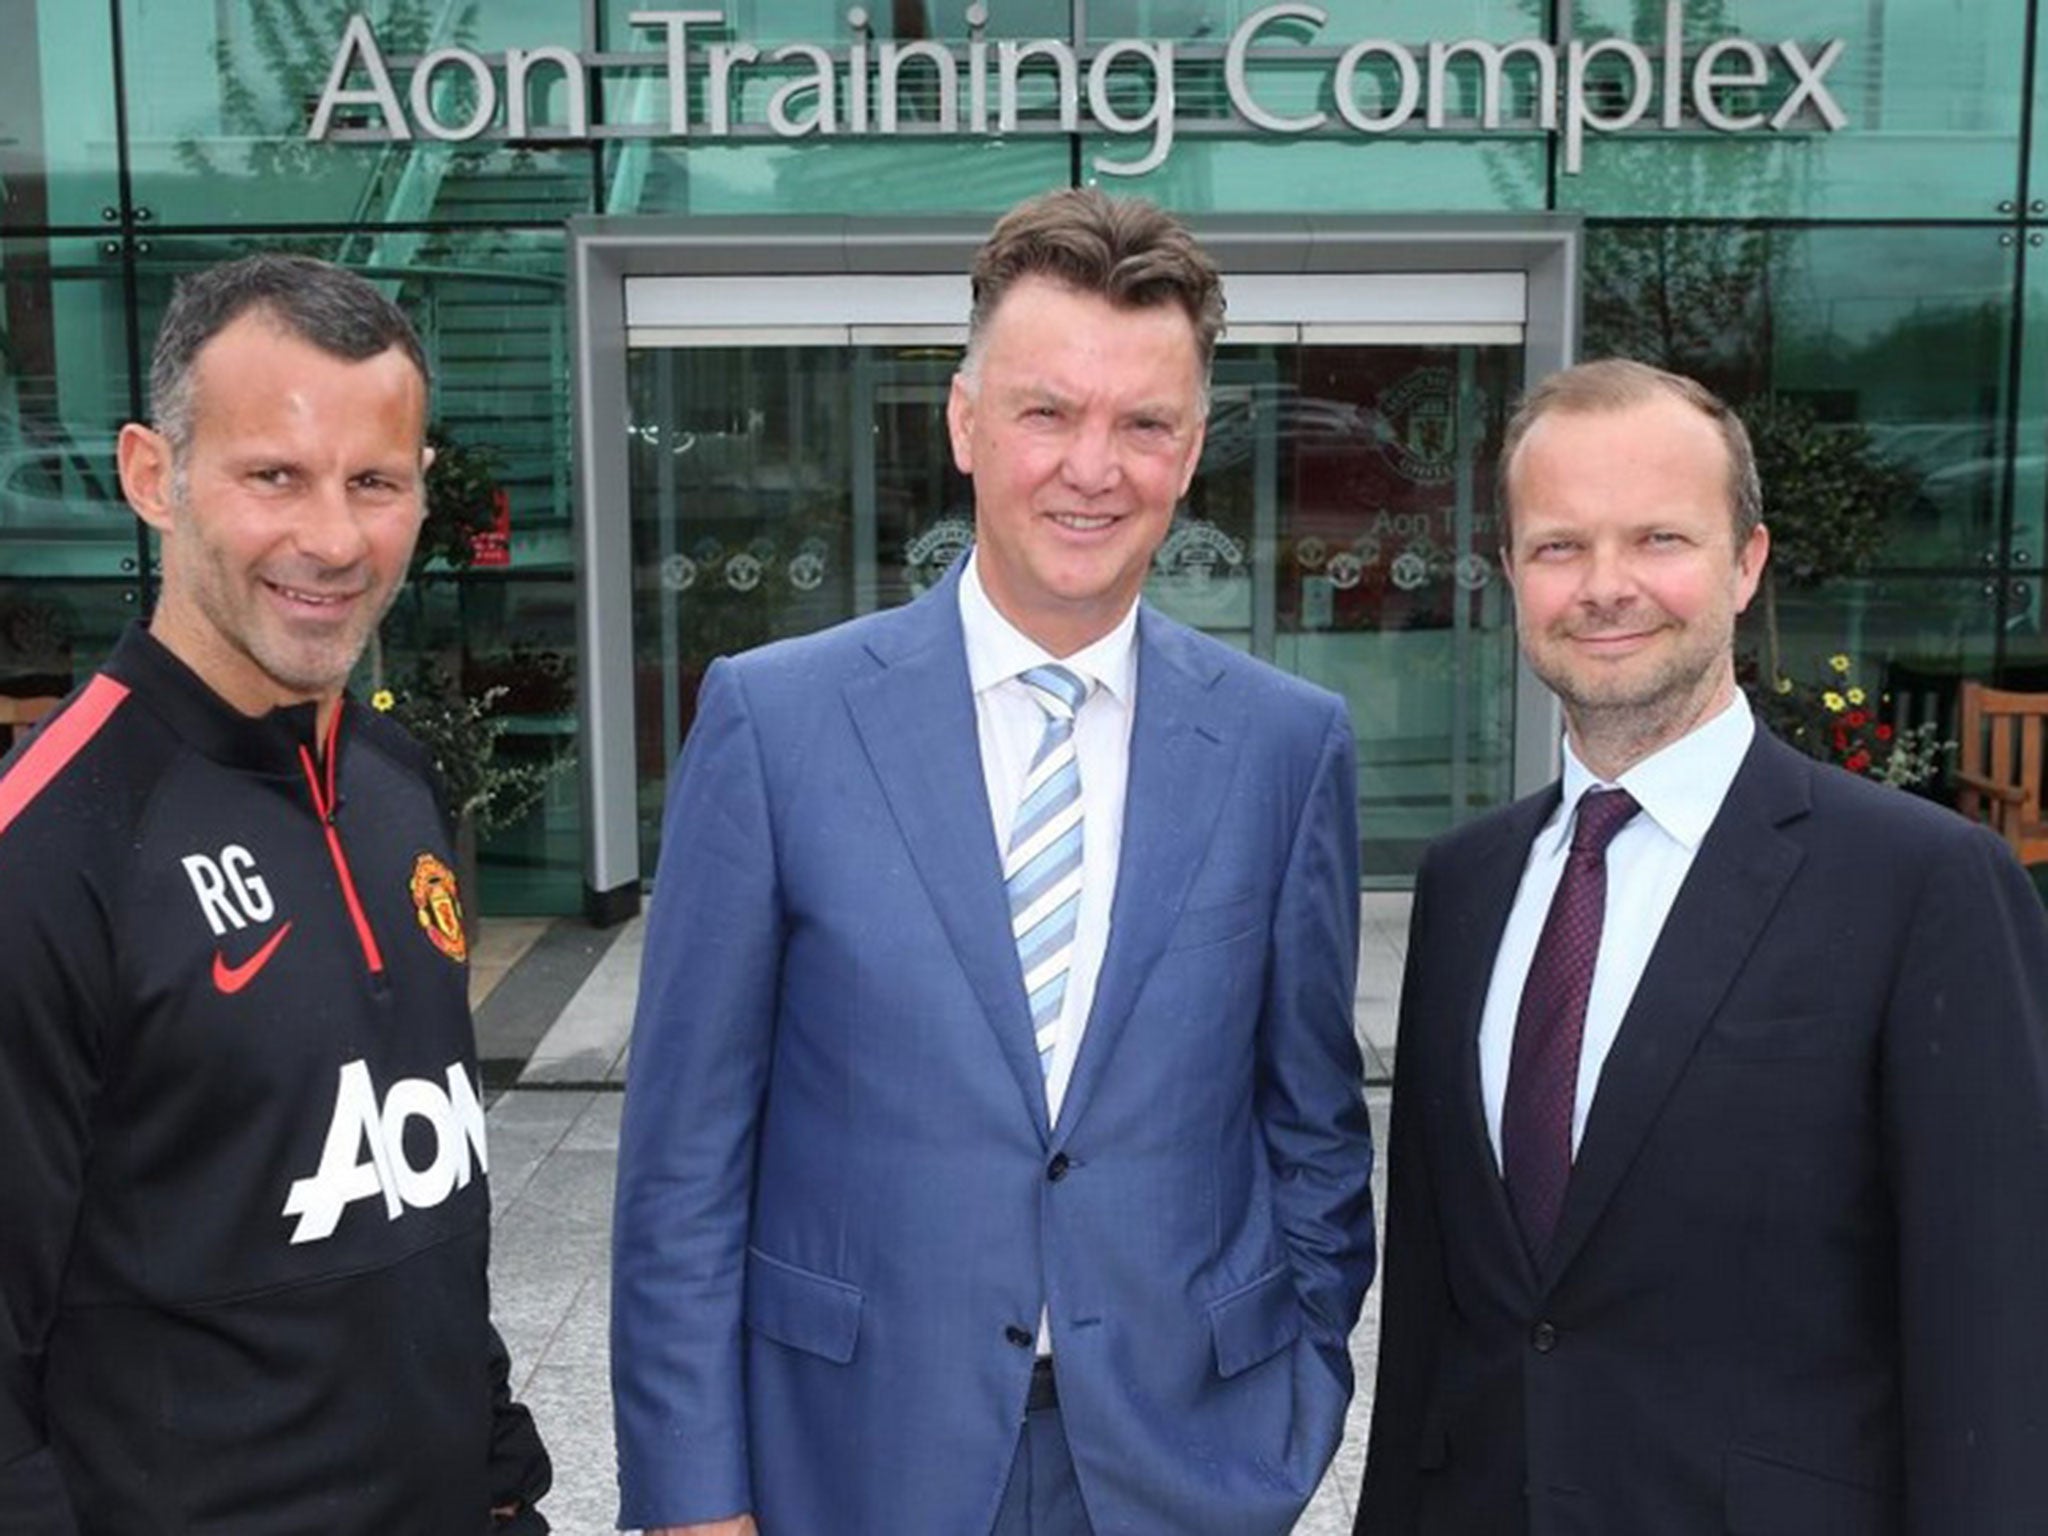 Louis van Gaal at United's training ground today alongside assistant manager Ryan Giggs and vice-chairman Ed Woodward